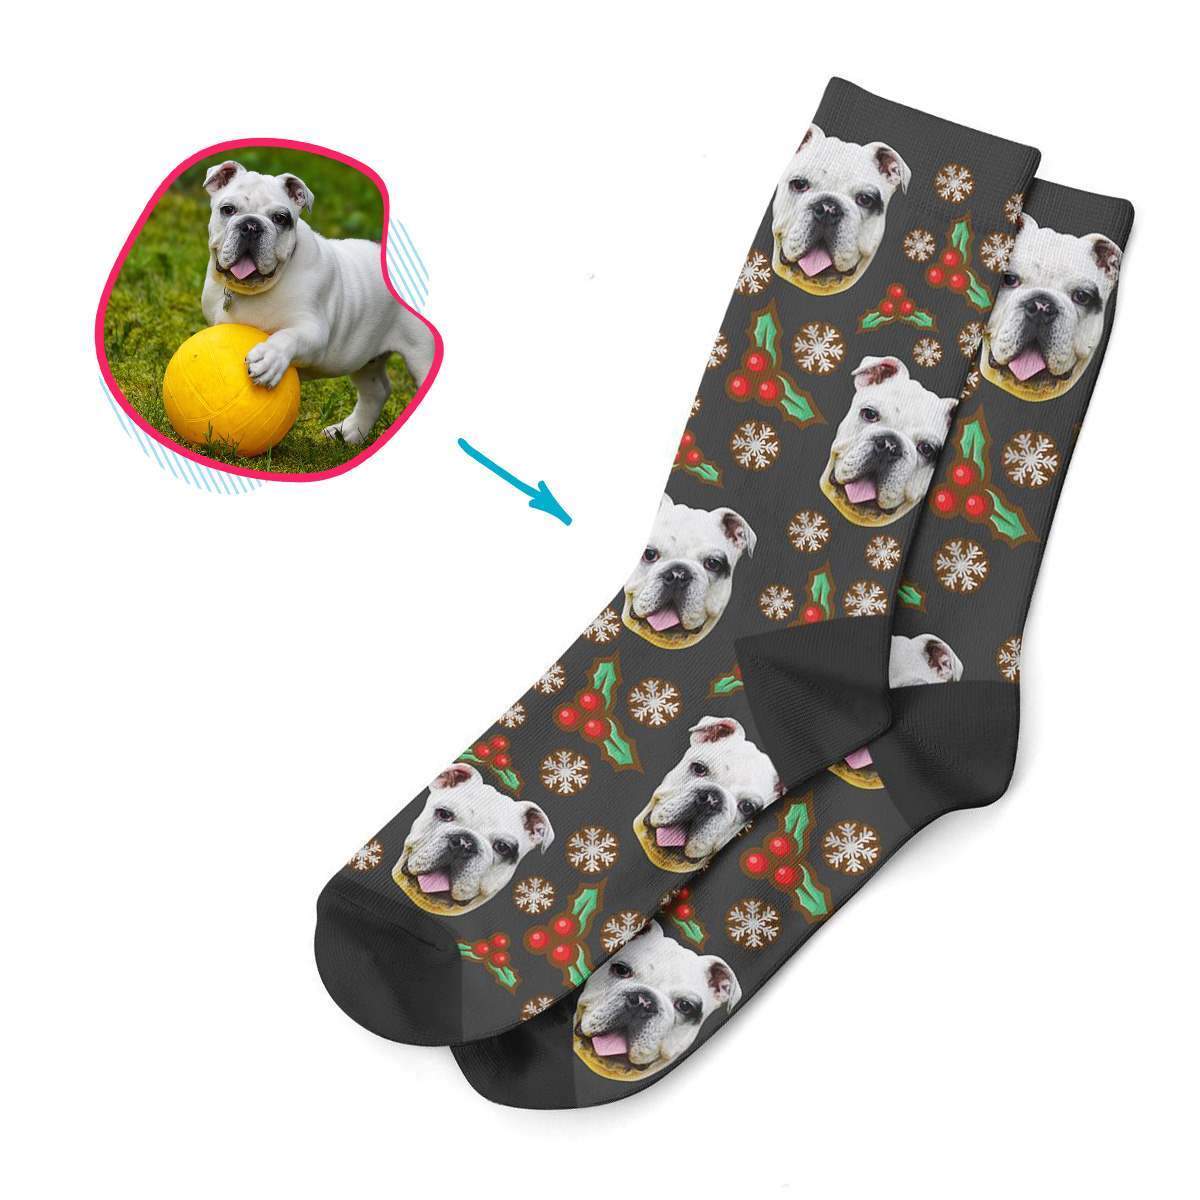 dark Mistletoe socks personalized with photo of face printed on them